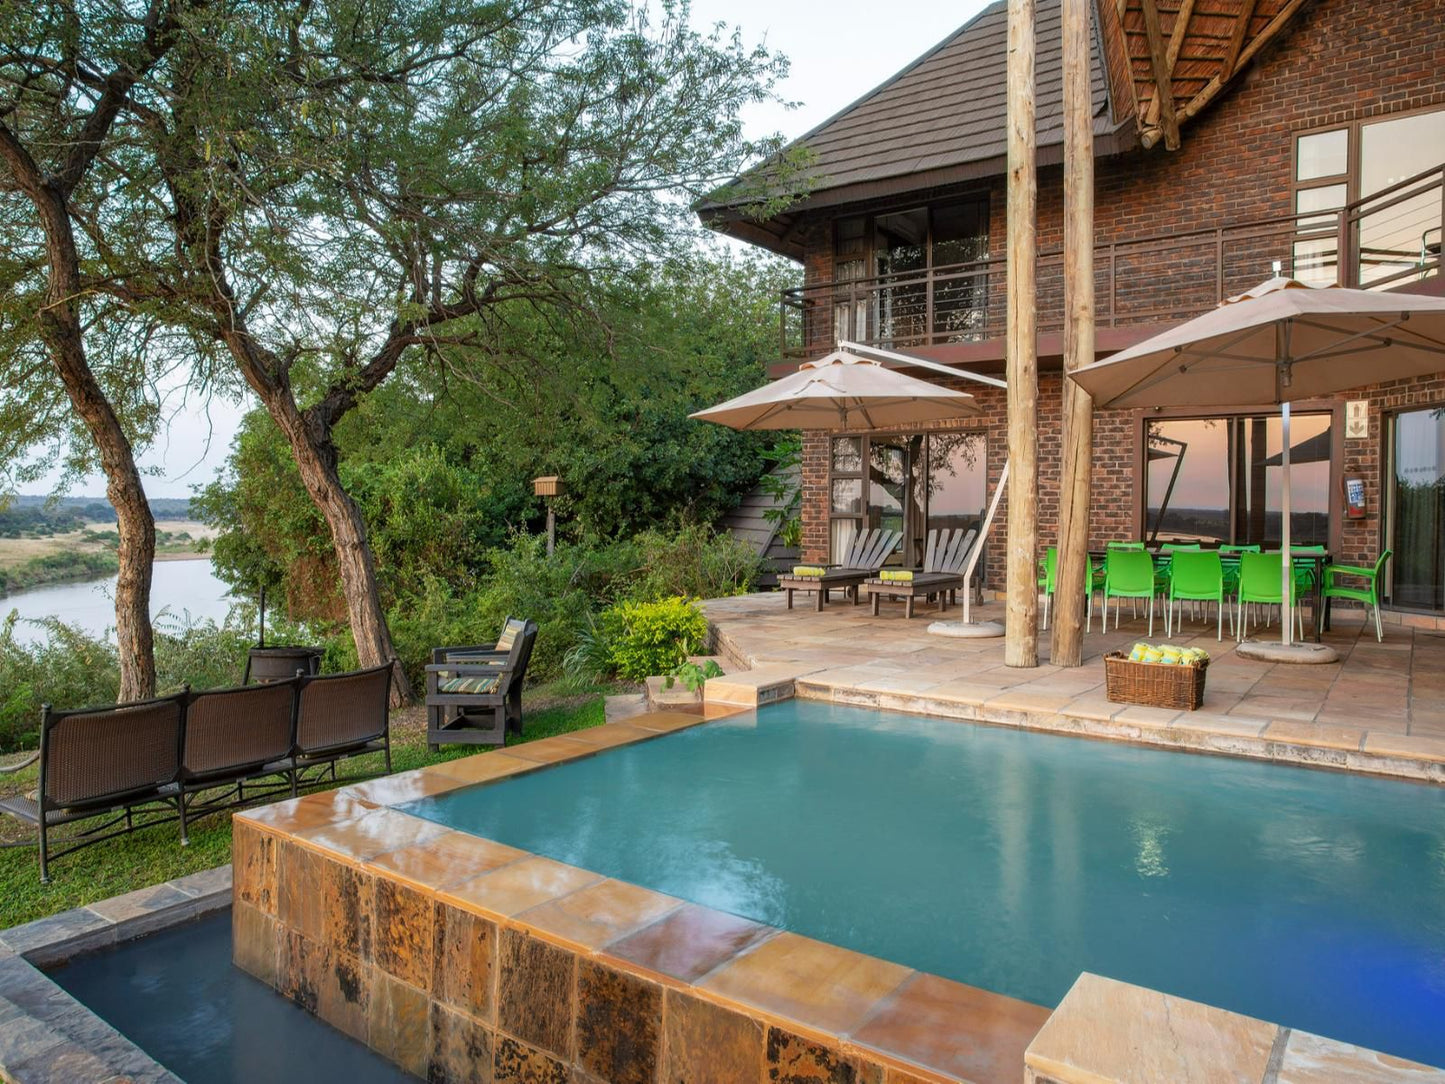 Hippo Hills Komatipoort Mpumalanga South Africa House, Building, Architecture, Swimming Pool